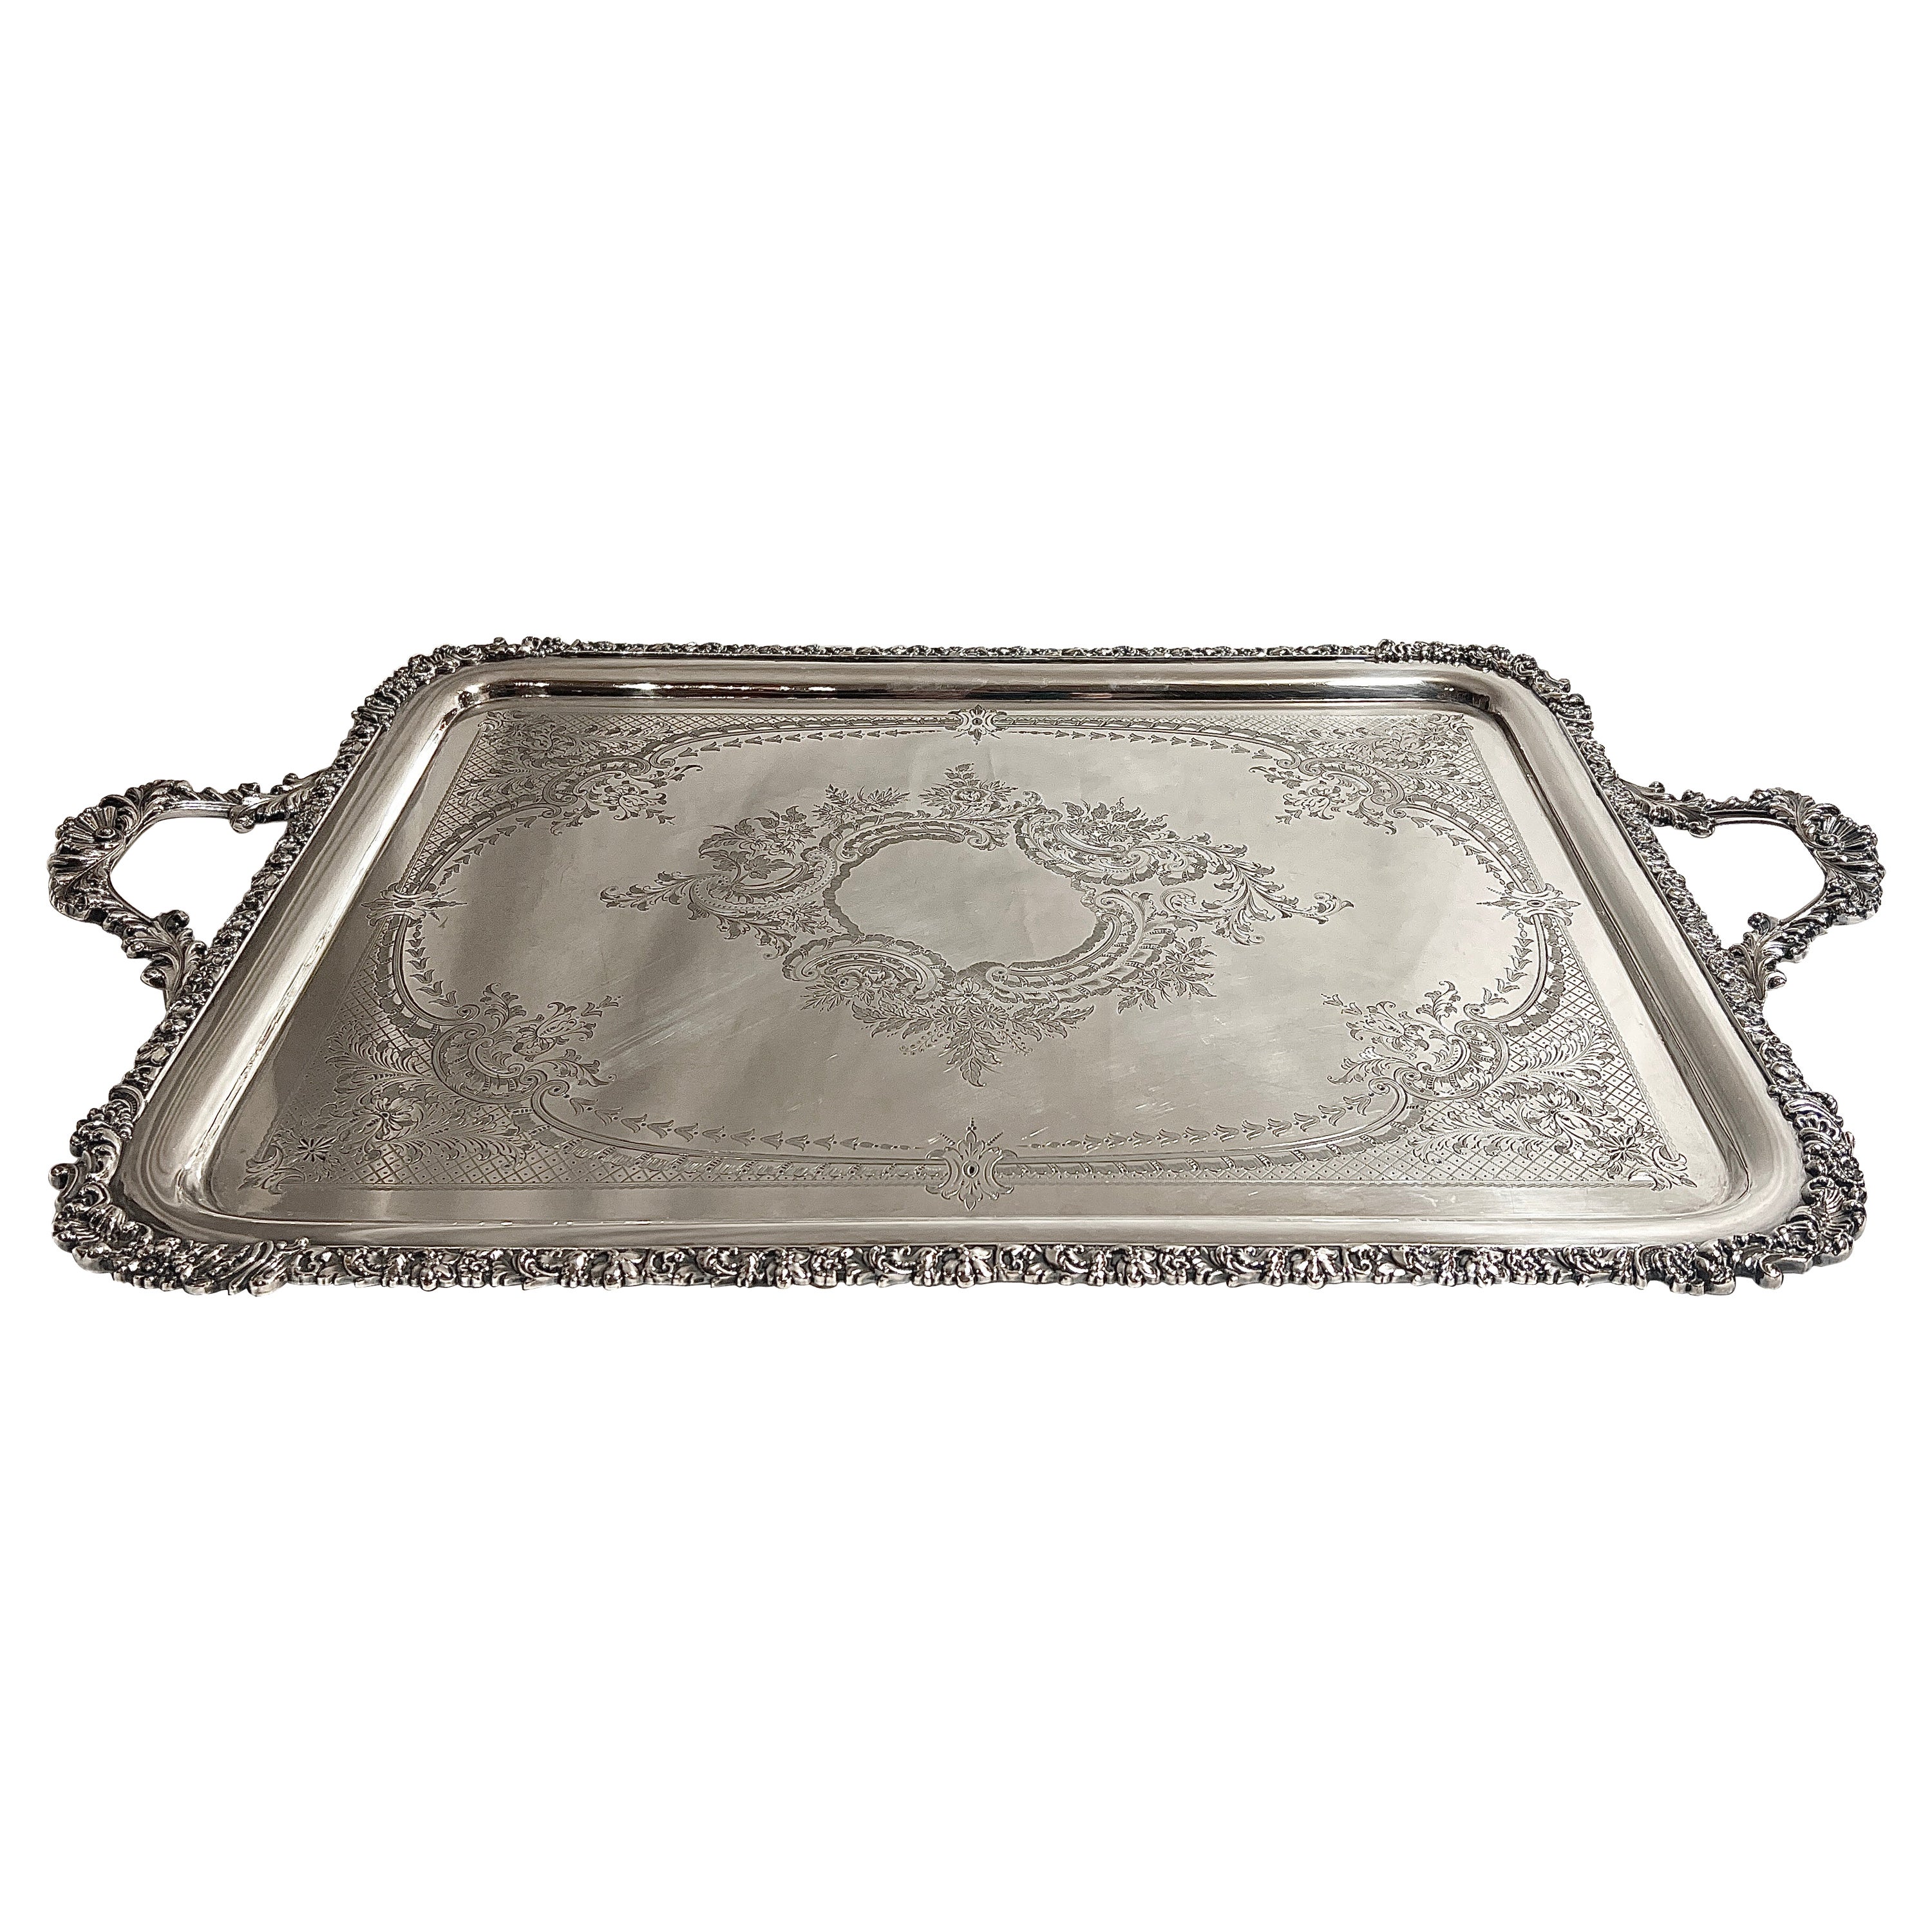 Antique Silver Plated Service Tray with Engraving and Rolled Border, Circa 1890. For Sale